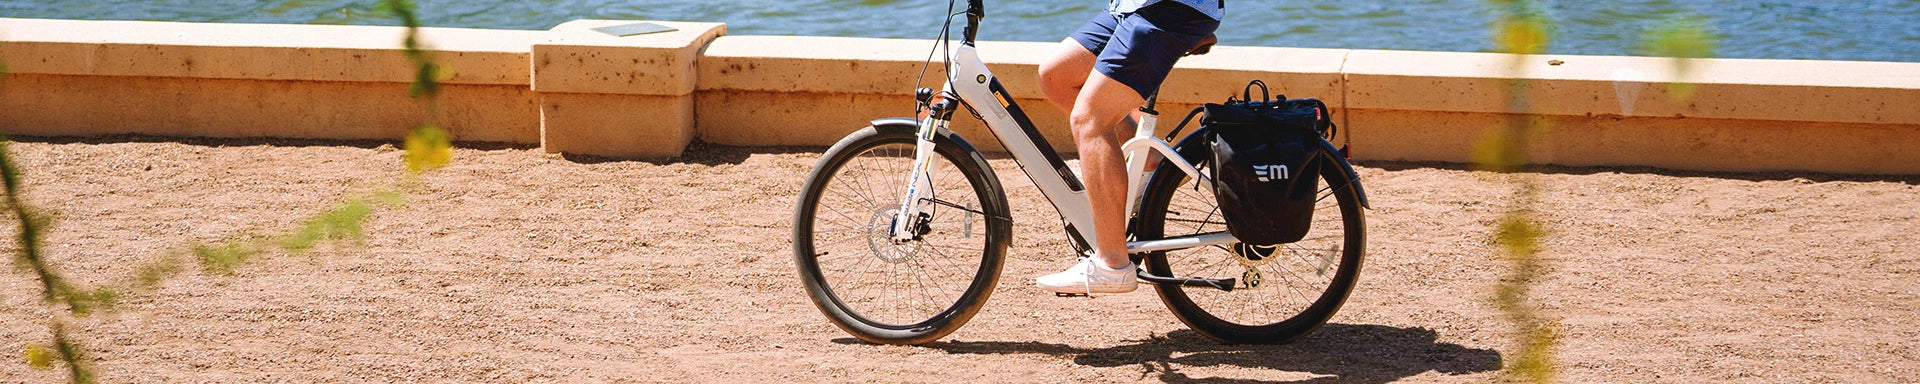 man riding on an electric bicycle